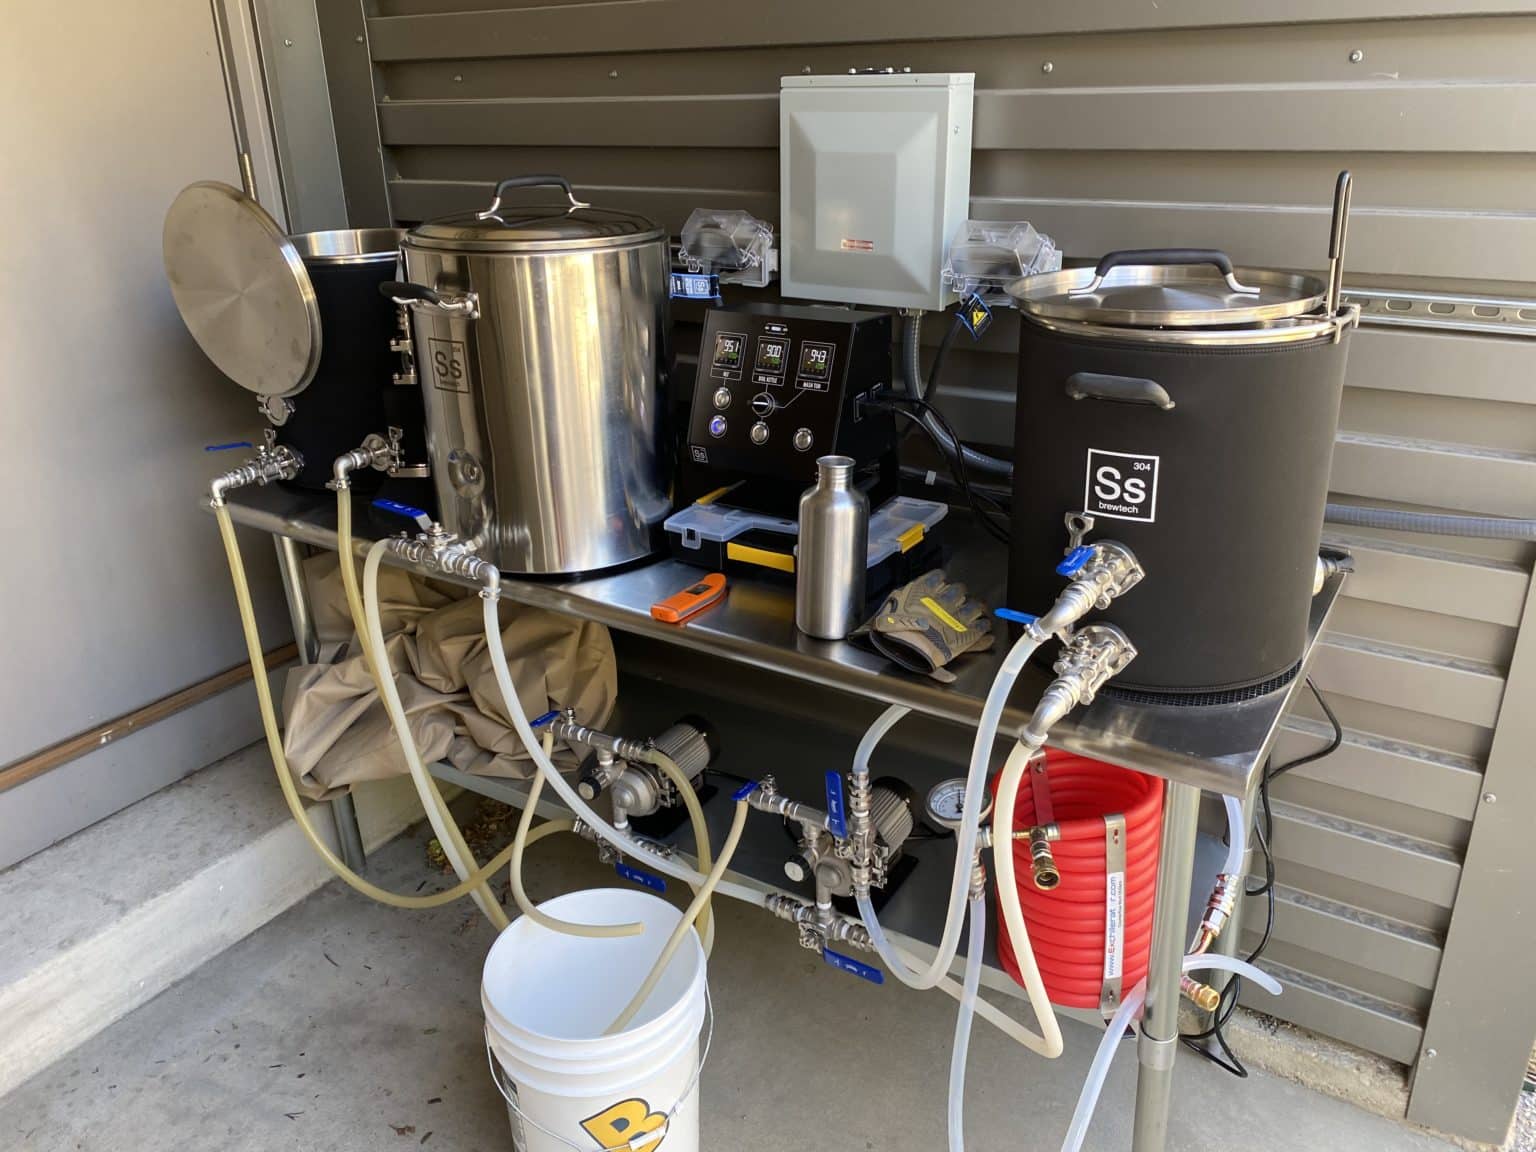 install home brew